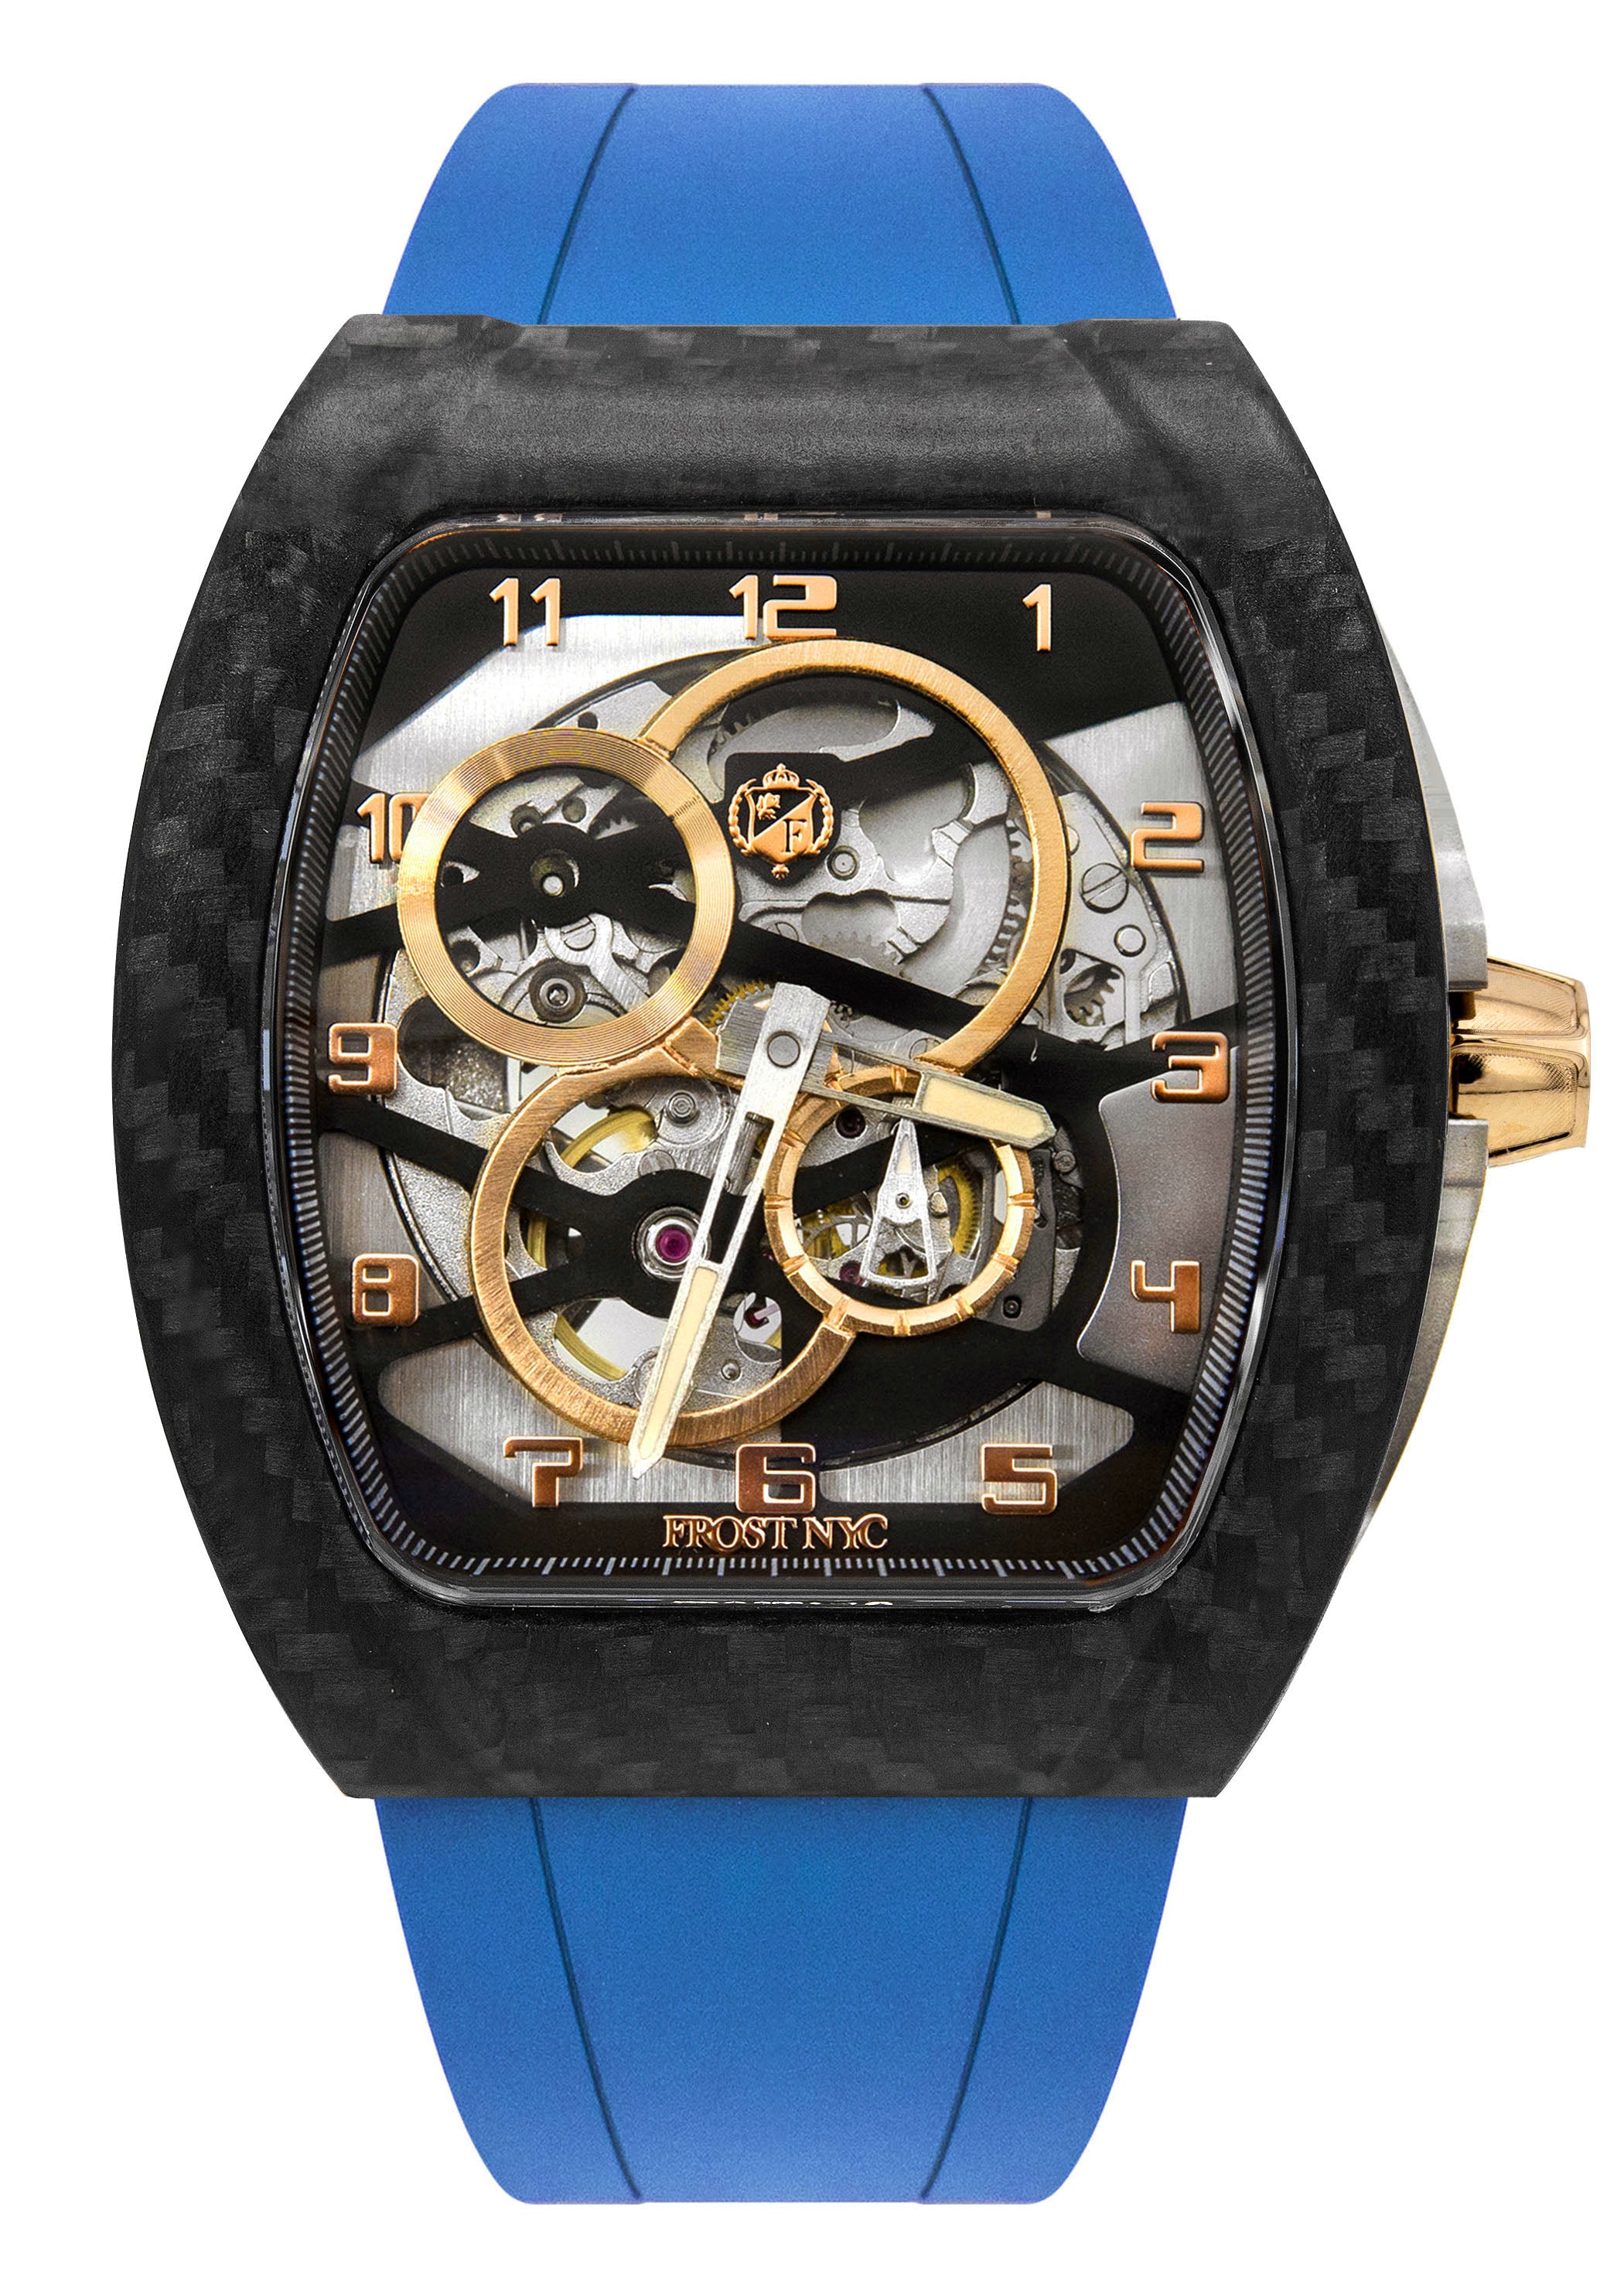 Frost NYC Mens Watch - Automatic Skeleton Carbon Fiber Sport Gold Watch | FRST-01-CFY| Blue